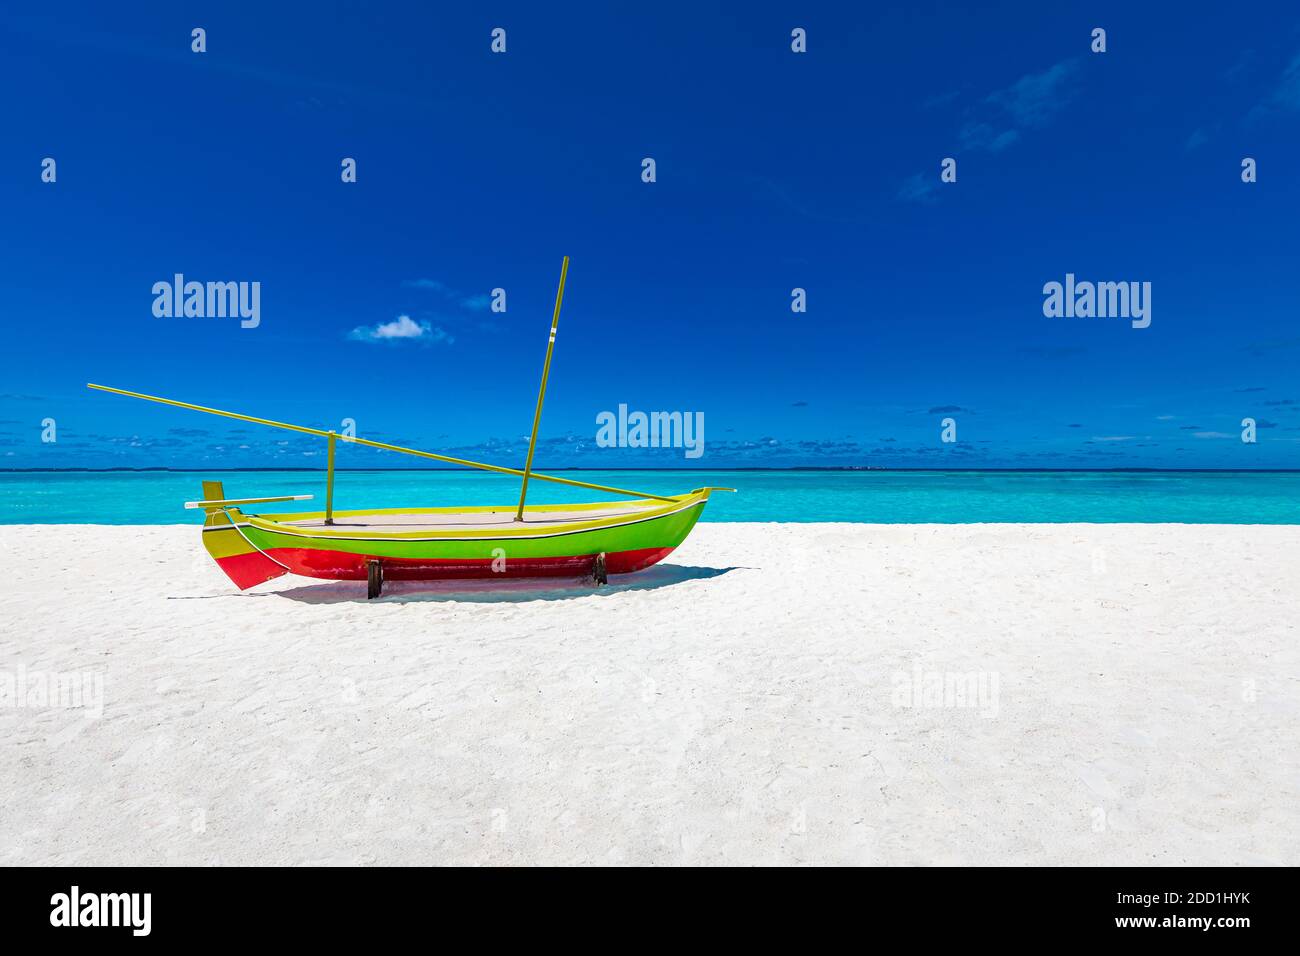 Tropical beach scene with decoration Dhoni boat. Idyllic summer scenery, Maldives islands view, white sand, blue sea and sky with endless horizon. Stock Photo